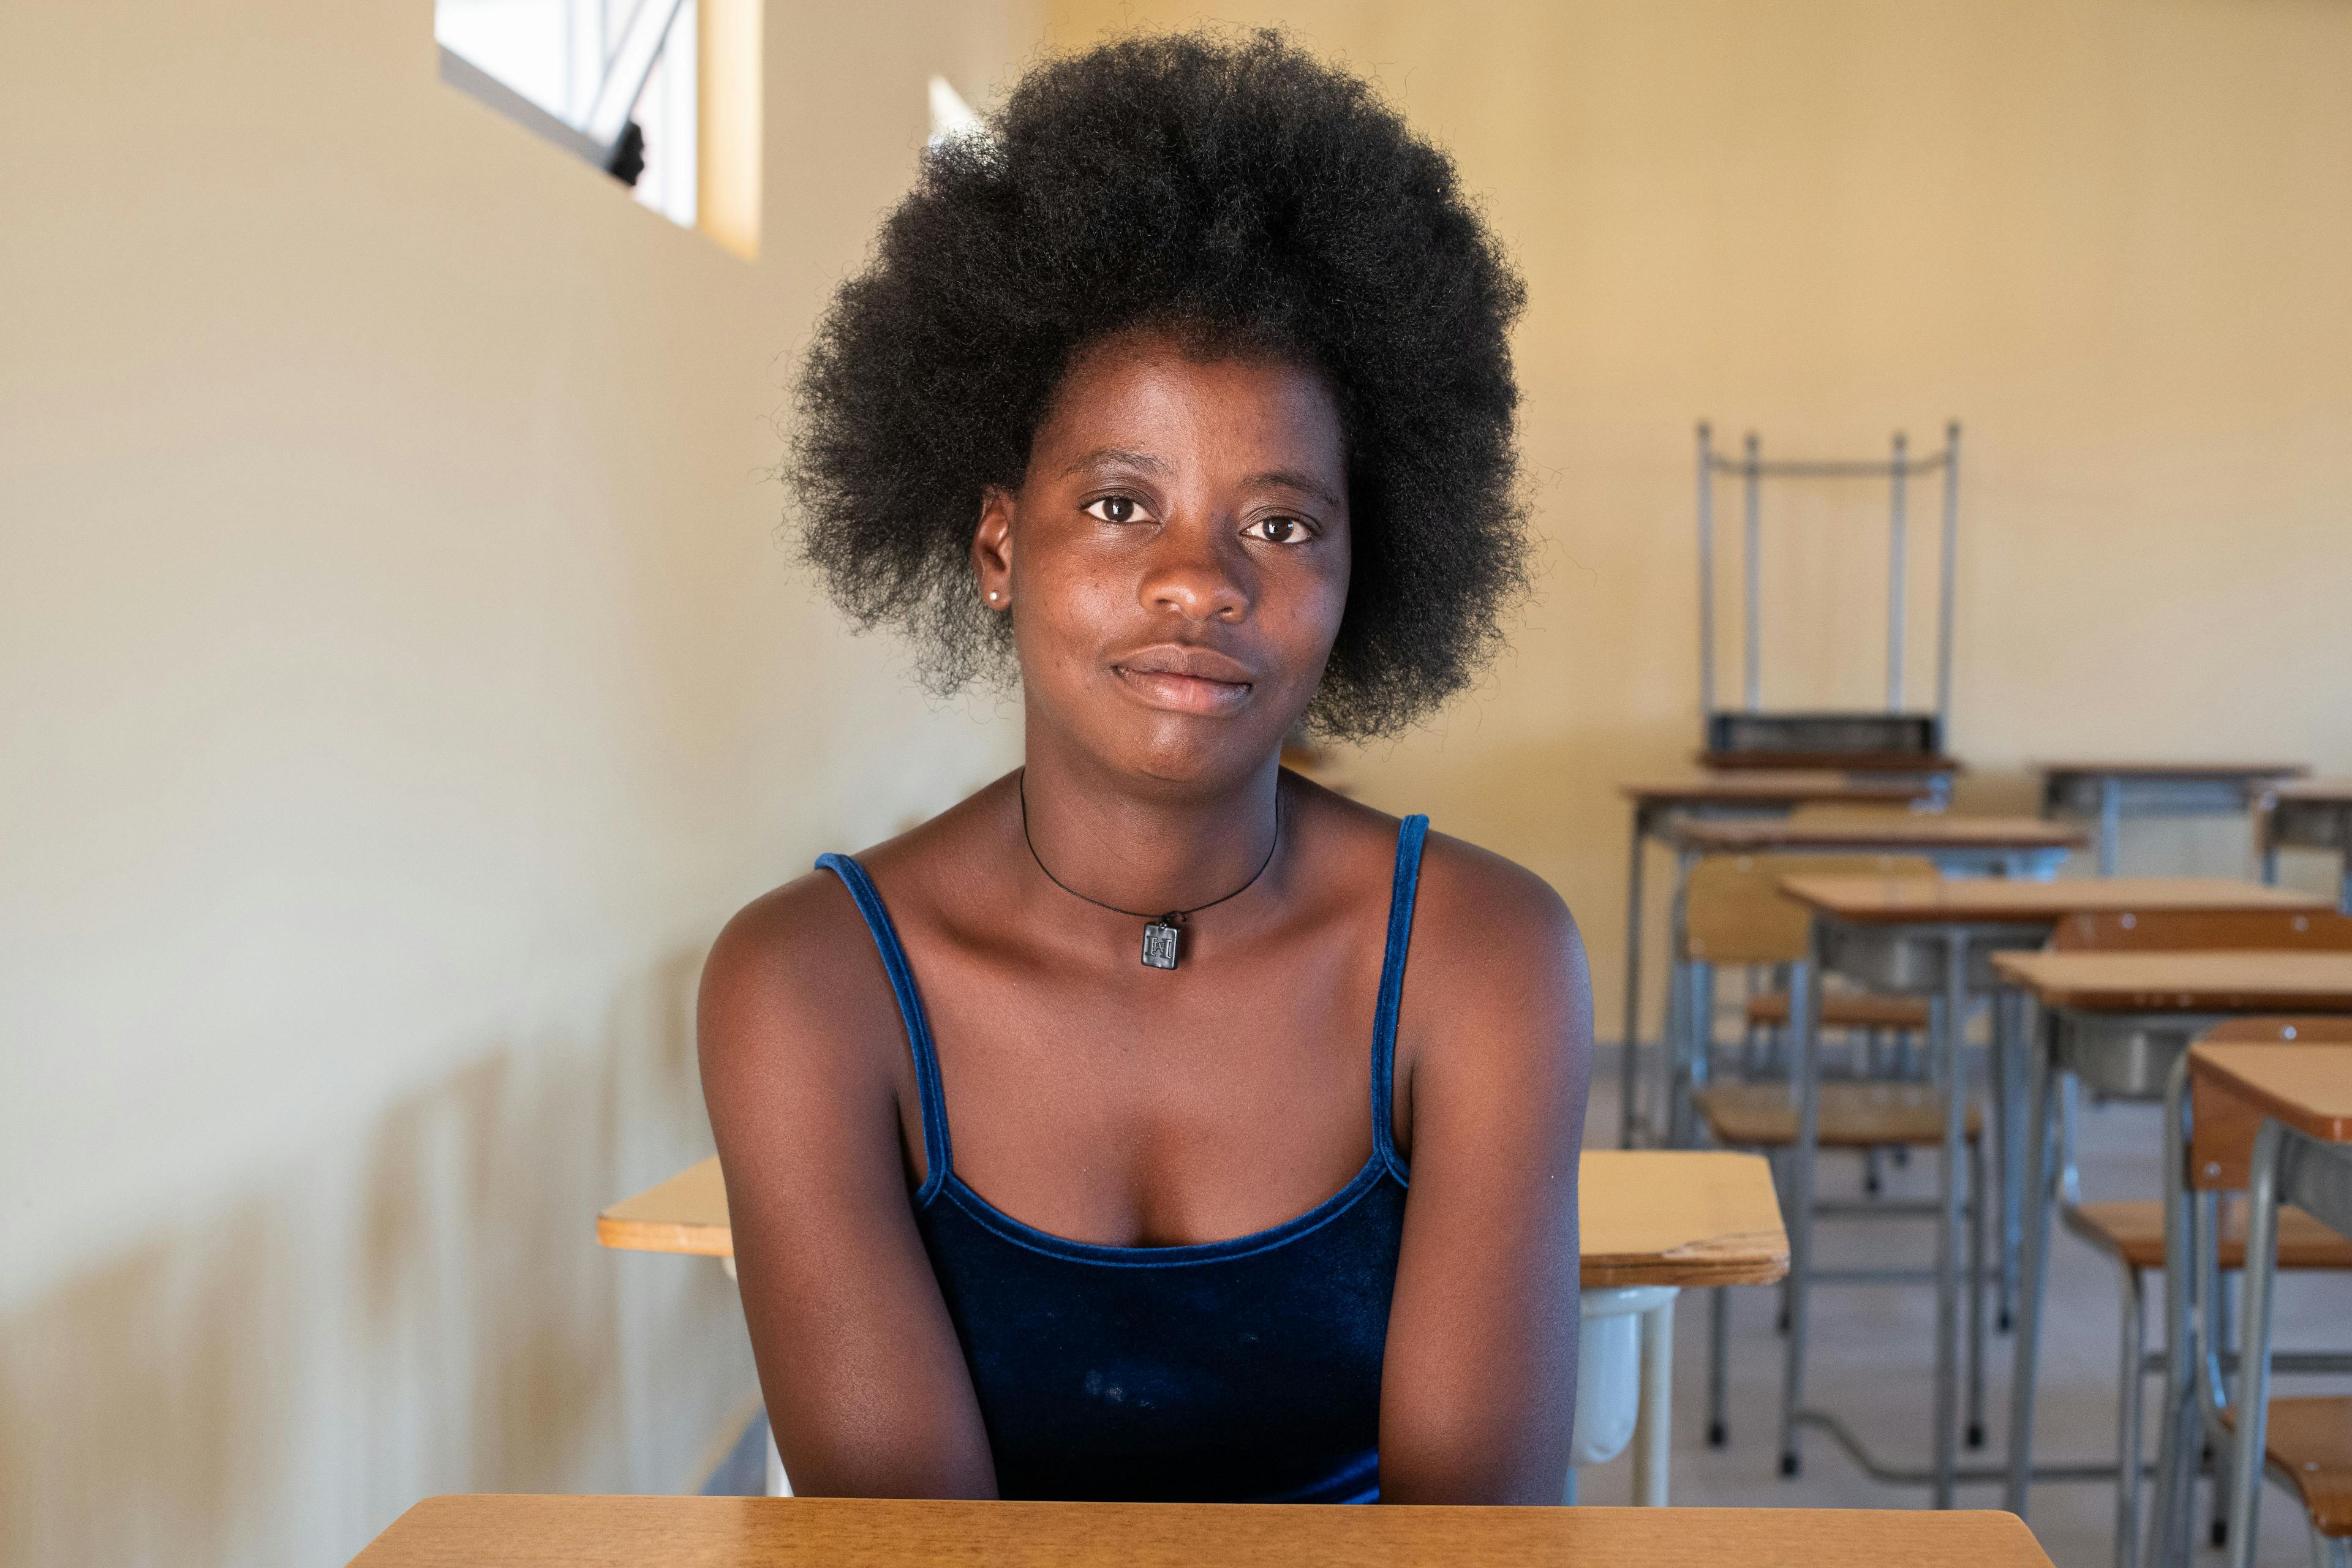 Women still held back by gender norms. Monica Henriques (19) does not see many prospects in drought-hit Cahama. She has set her sights on Ondjiva to ‘realise her dreams’. Social norms and gender barriers however lead to women being less mobile than men which makes them more vulnerable in the face of climate change. 